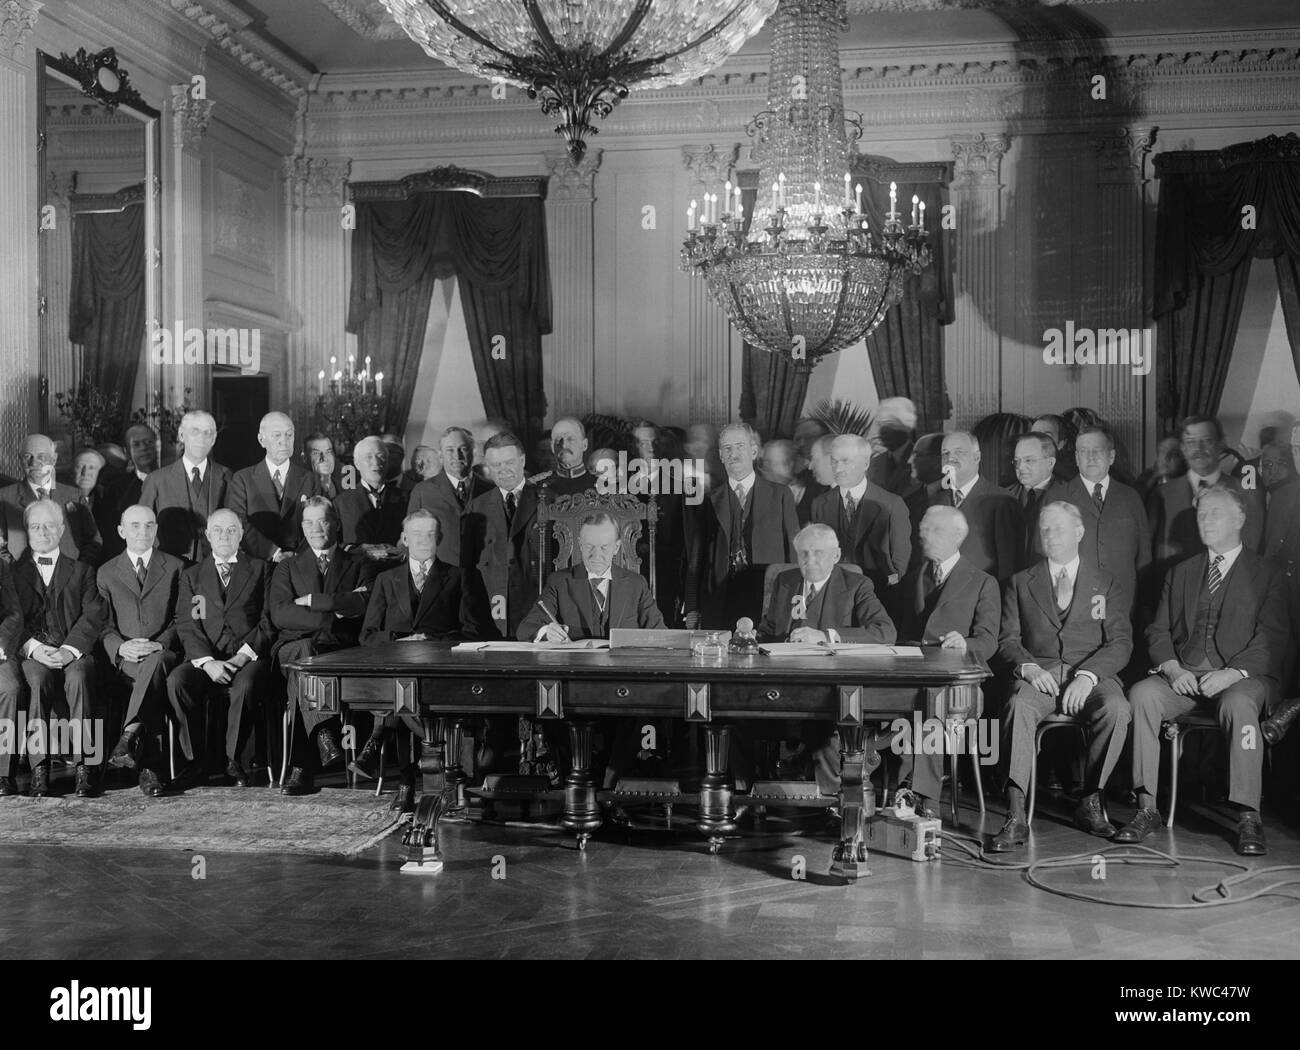 President Coolidge signs Kellogg Treaty in the East Room of the White House on Jan. 17, 1929. Kellogg-Briand Pact was an multi-national agreement to outlaw war. At table, L-R: Vice President Dawes, Pres. Coolidge, Sec. of State Frank Kellogg. Standing men include: William Borah; Sen. Claude Swanson; Sen. Thomas Walsh; VP-elect Charles Curtis; and Sen. D.O. Hastings (BSLOC 2015 15 122) Stock Photo